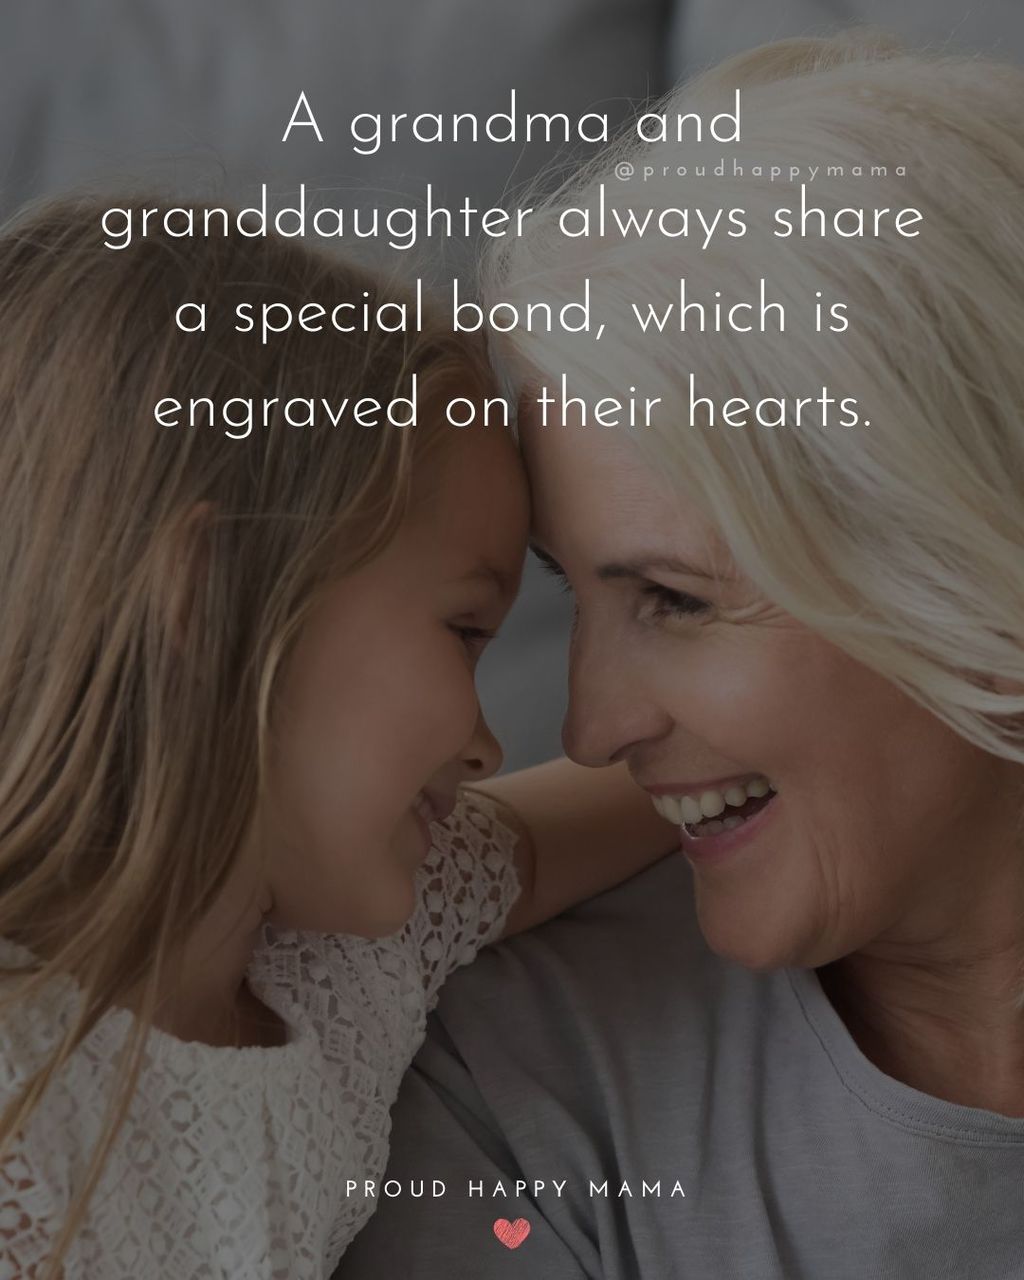 Granddaughter Quotes - A grandma and granddaughter always share a special bond, which is engraved on their hearts.